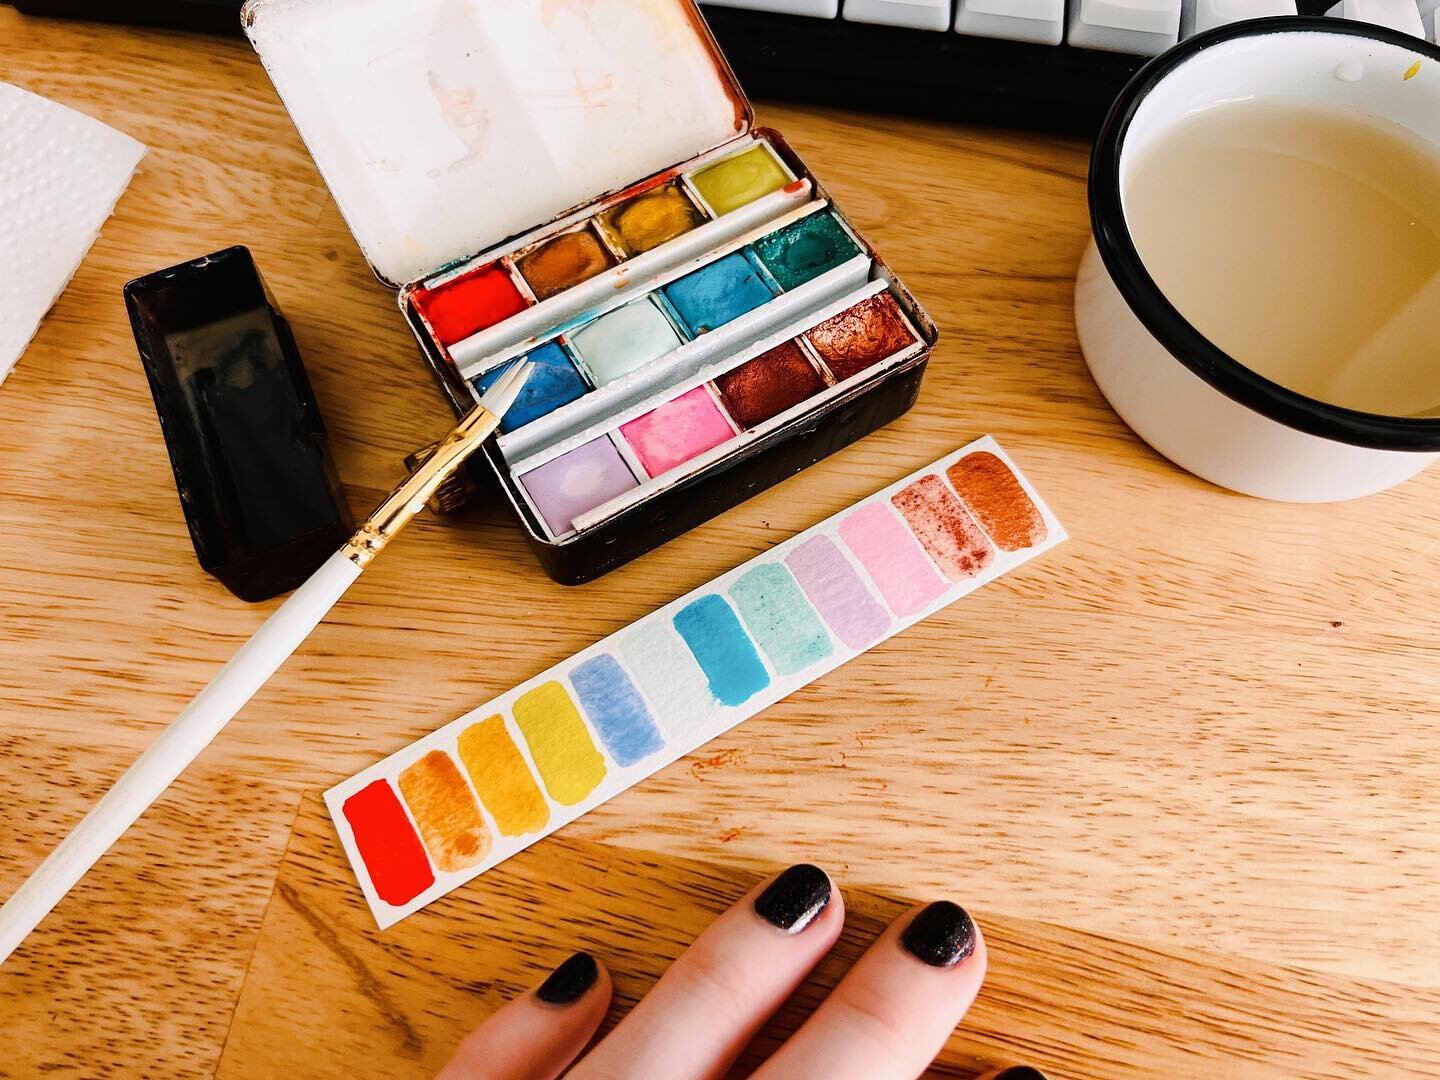 Treated myself to four handmade watercolors to fill out my @caseformaking travel set ✨

The packaging and texture and color palette is so yummy

Now I&rsquo;m in the mood to make mini paintings for friends. Who wants a holiday card? 😊